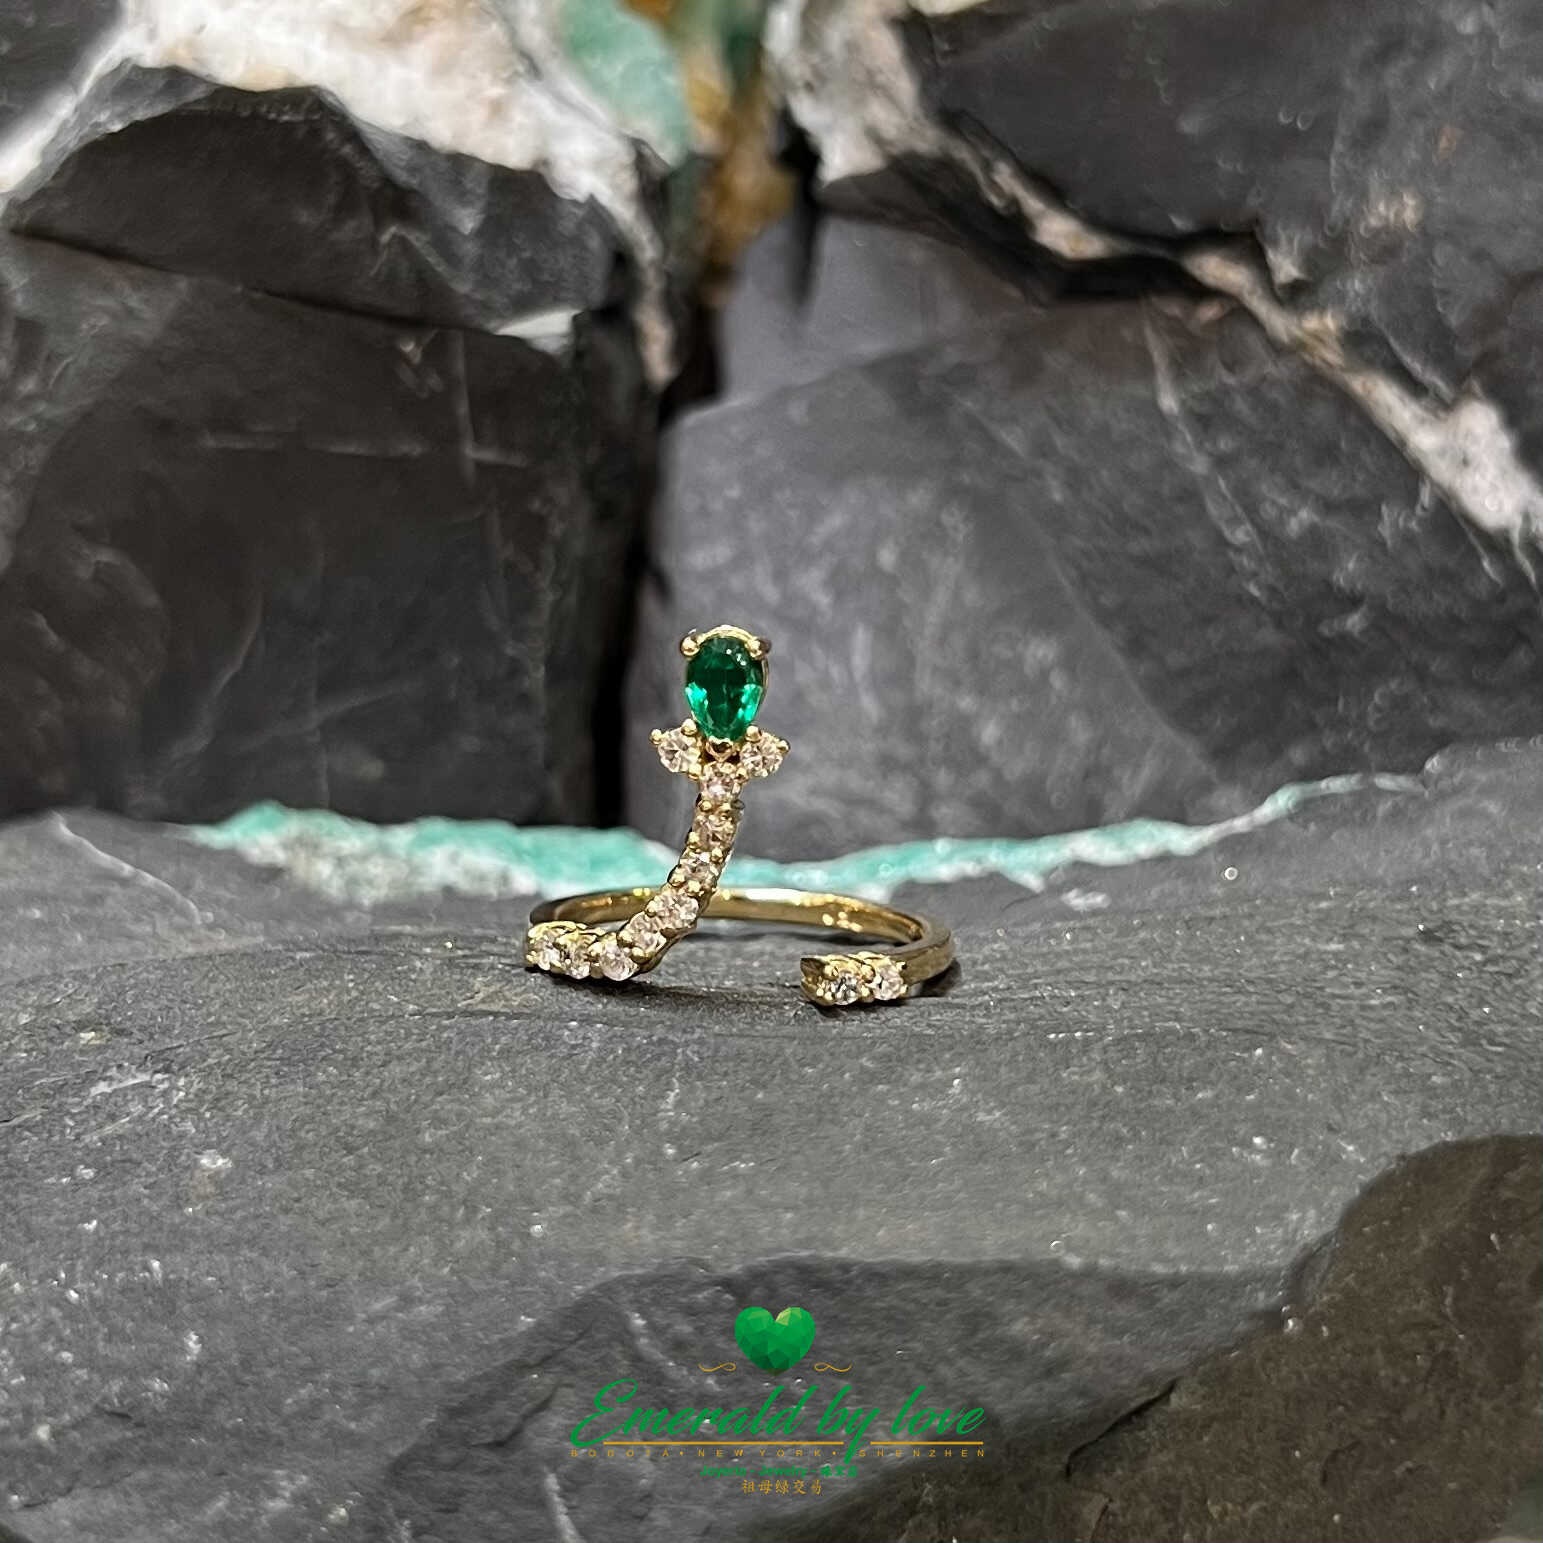 Elegant Yellow Gold Ring with 0.36 Ct Teardrop Emerald - A Touch of Natural Sophistication